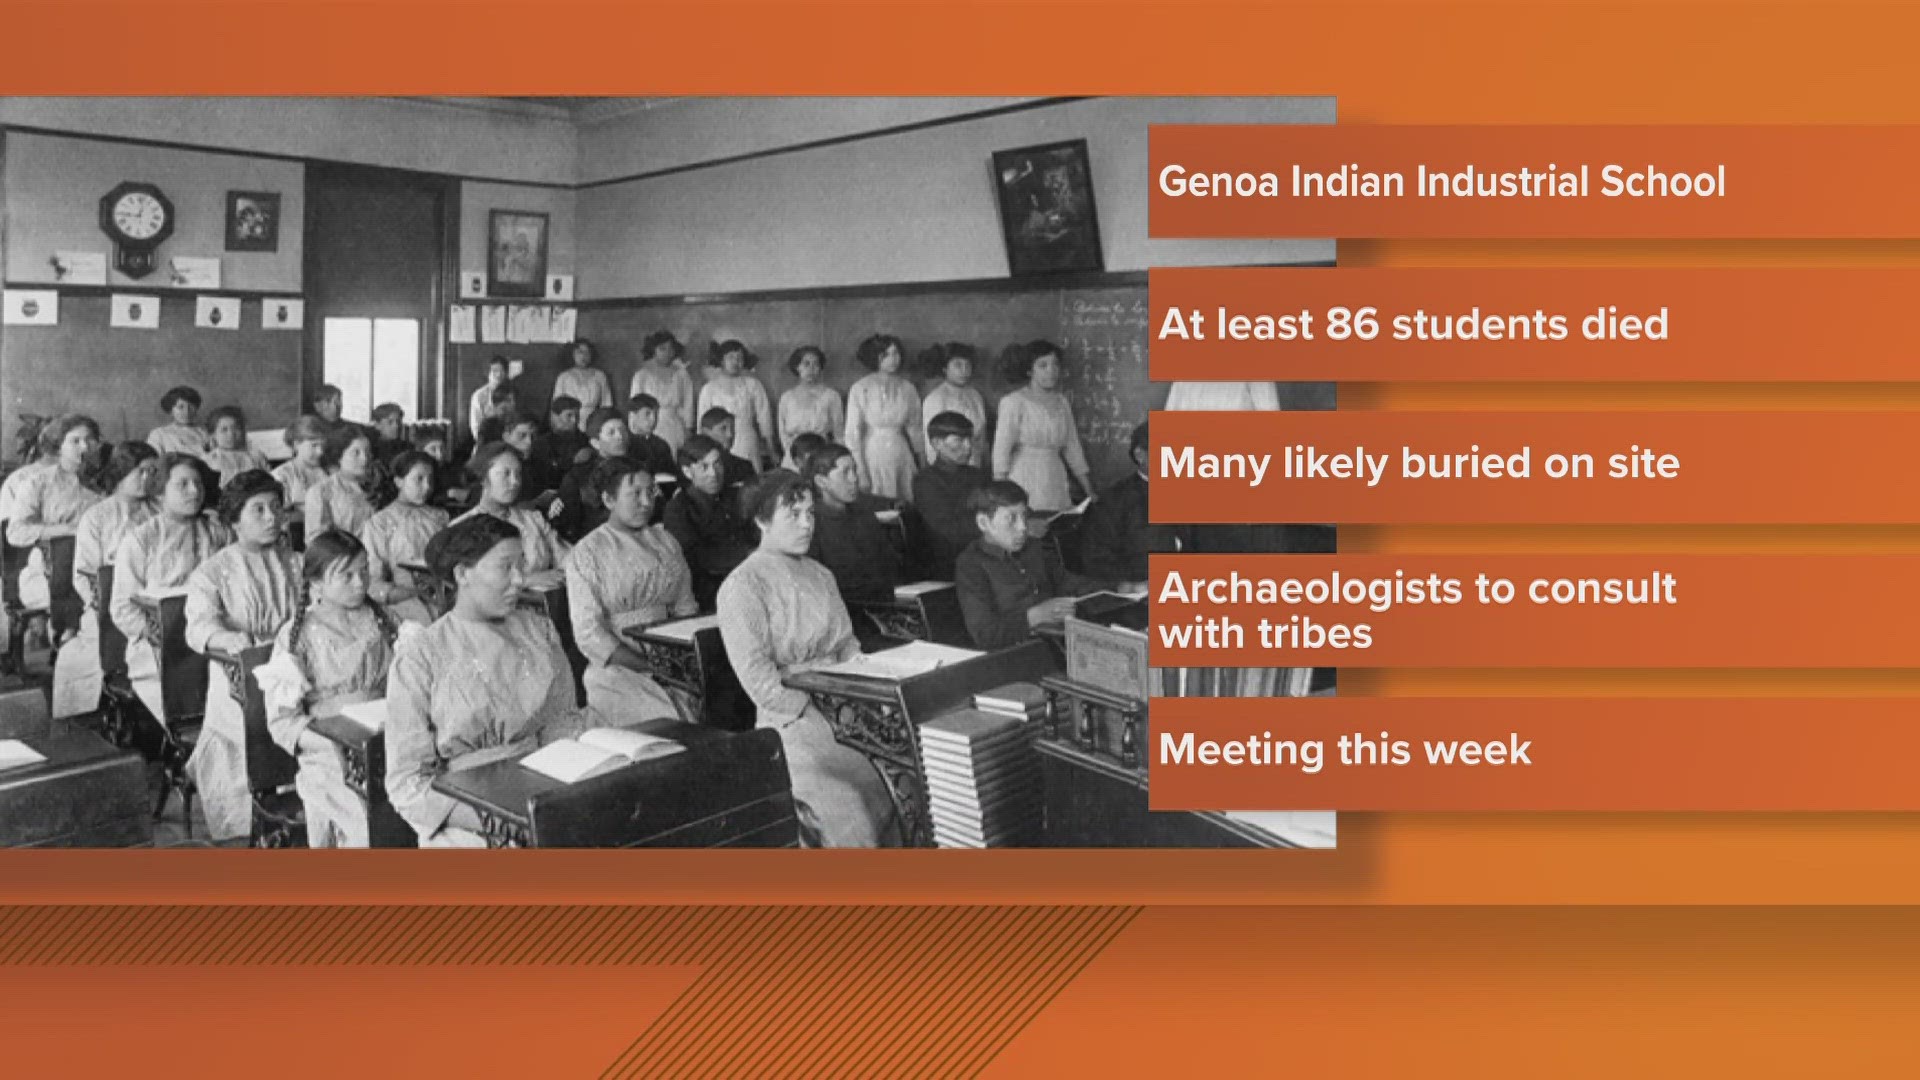 Indigenous children from more than 40 tribes across the country, including Maine, were brought to the Genoa Indian Industrial School in Nebraska.